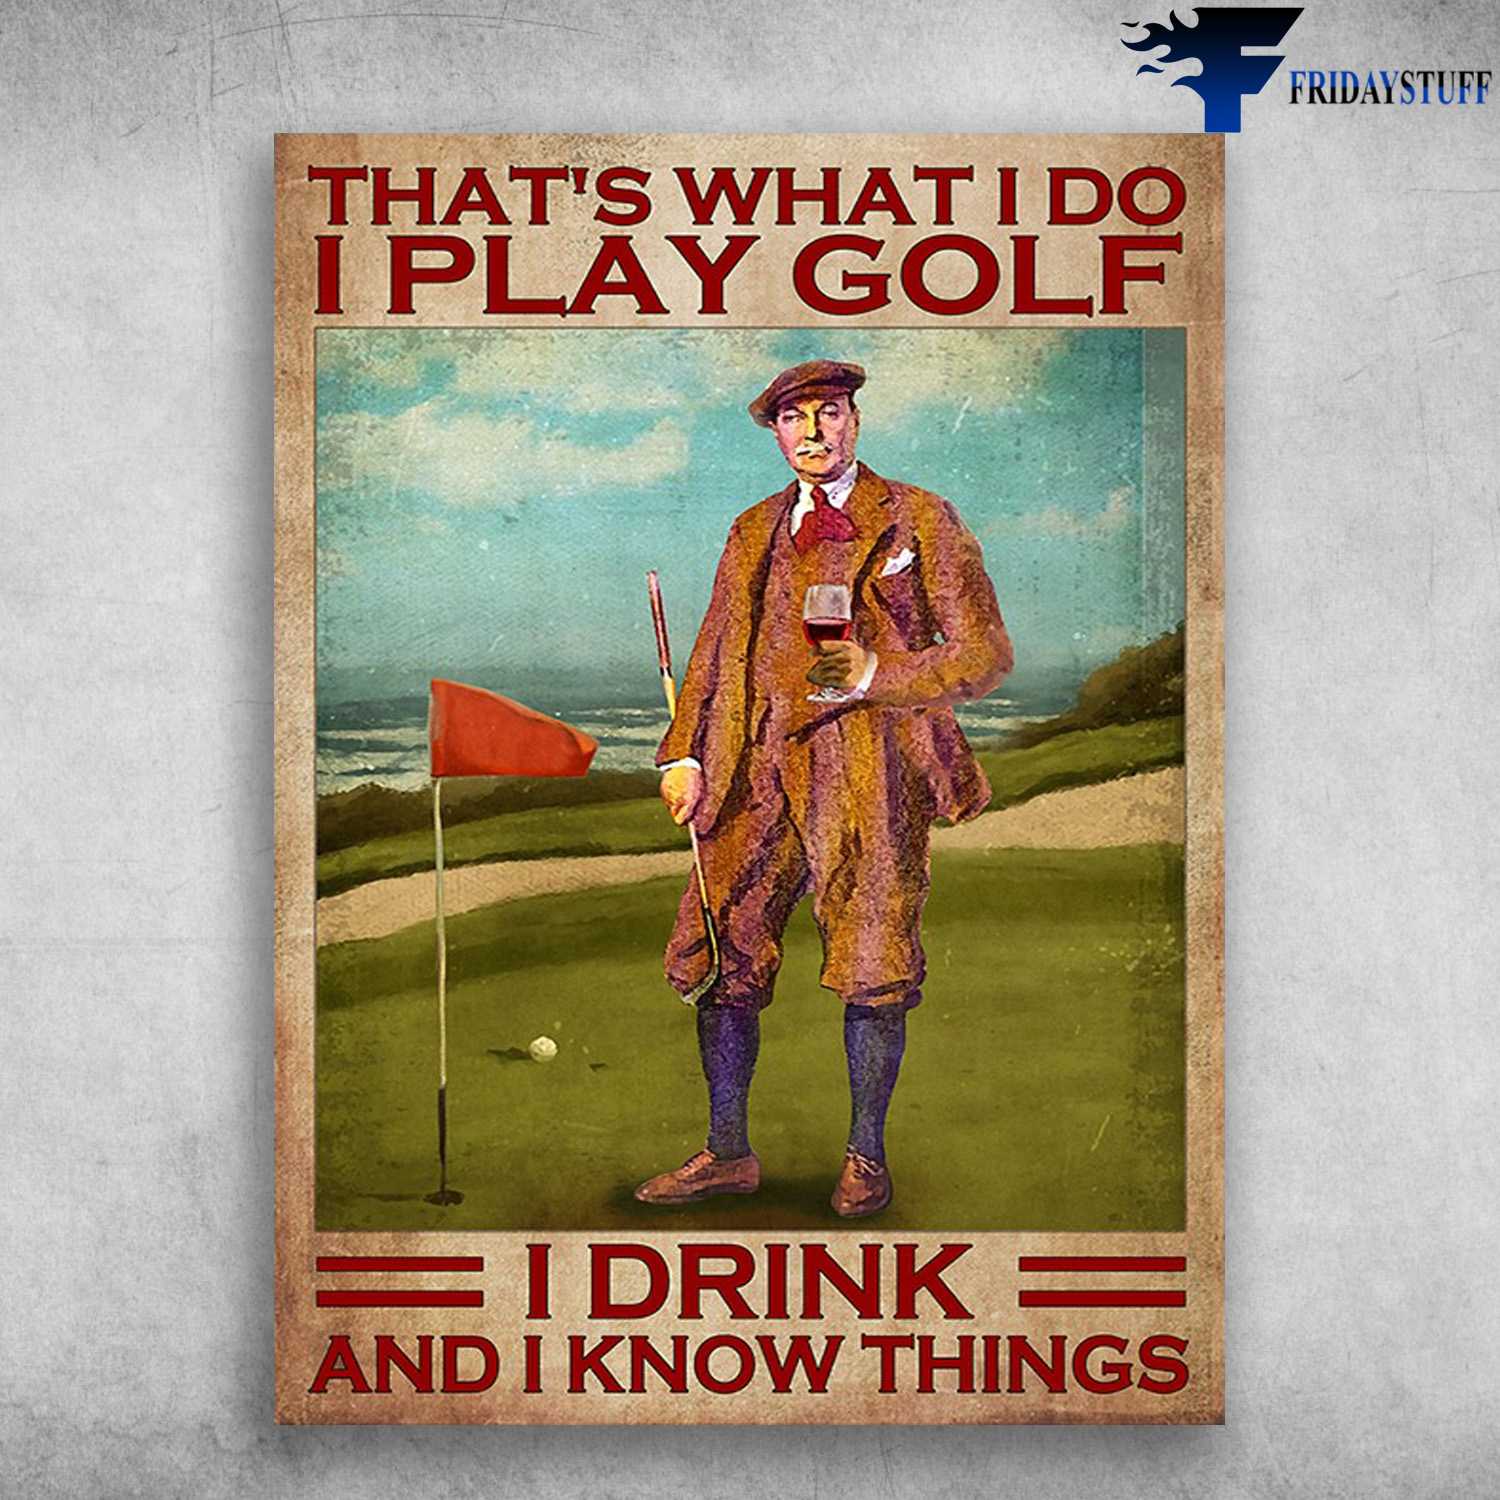 Old Man Plays Golf, Golf And Wine - That's What I Do, I Play Golf, I Drink, And I Know Things